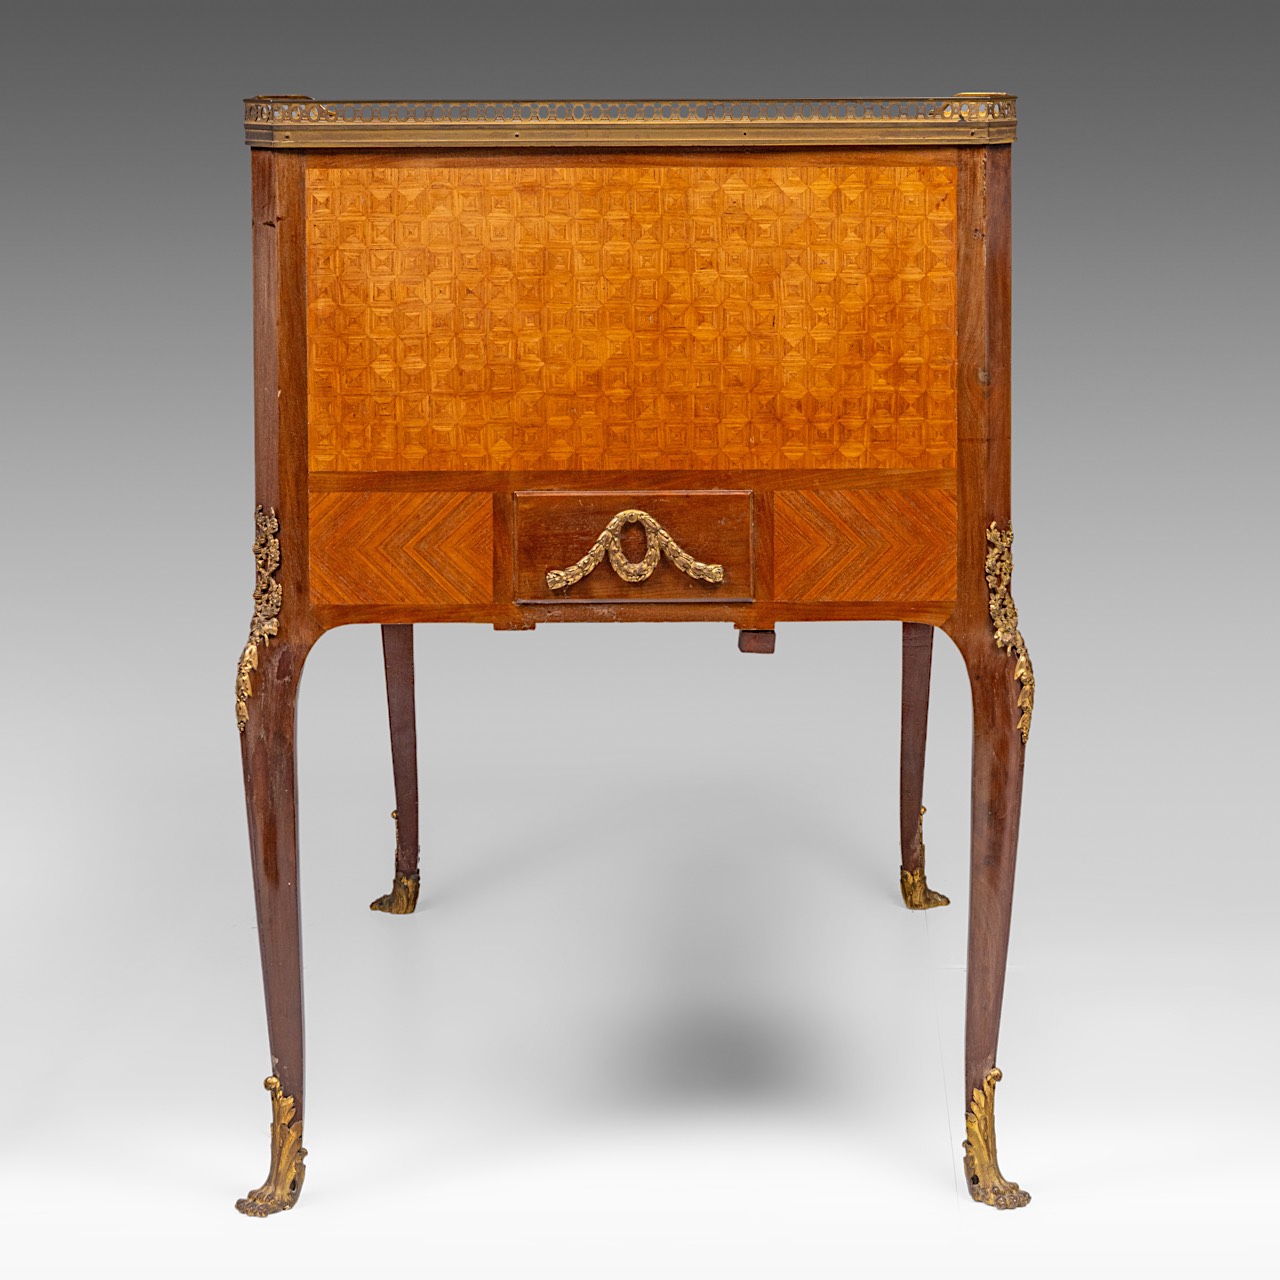 A leather-topped Transitional-style bureau plat and rolltop desk with parquetry and gilt bronze moun - Image 6 of 9